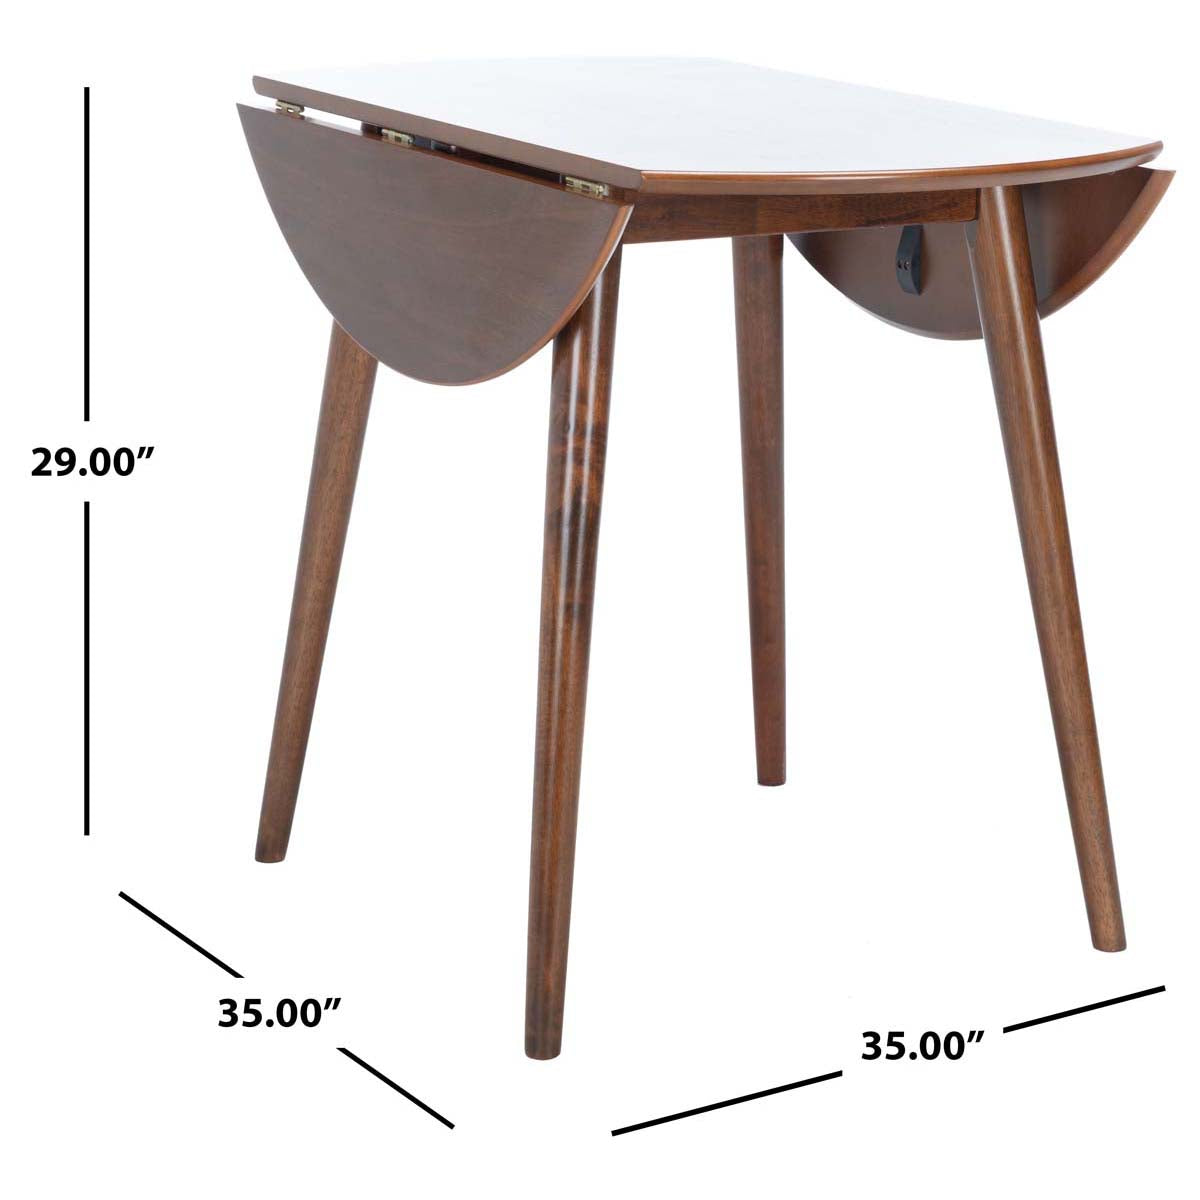 Safavieh Lovell Folding Round Dining Table , DTB1401